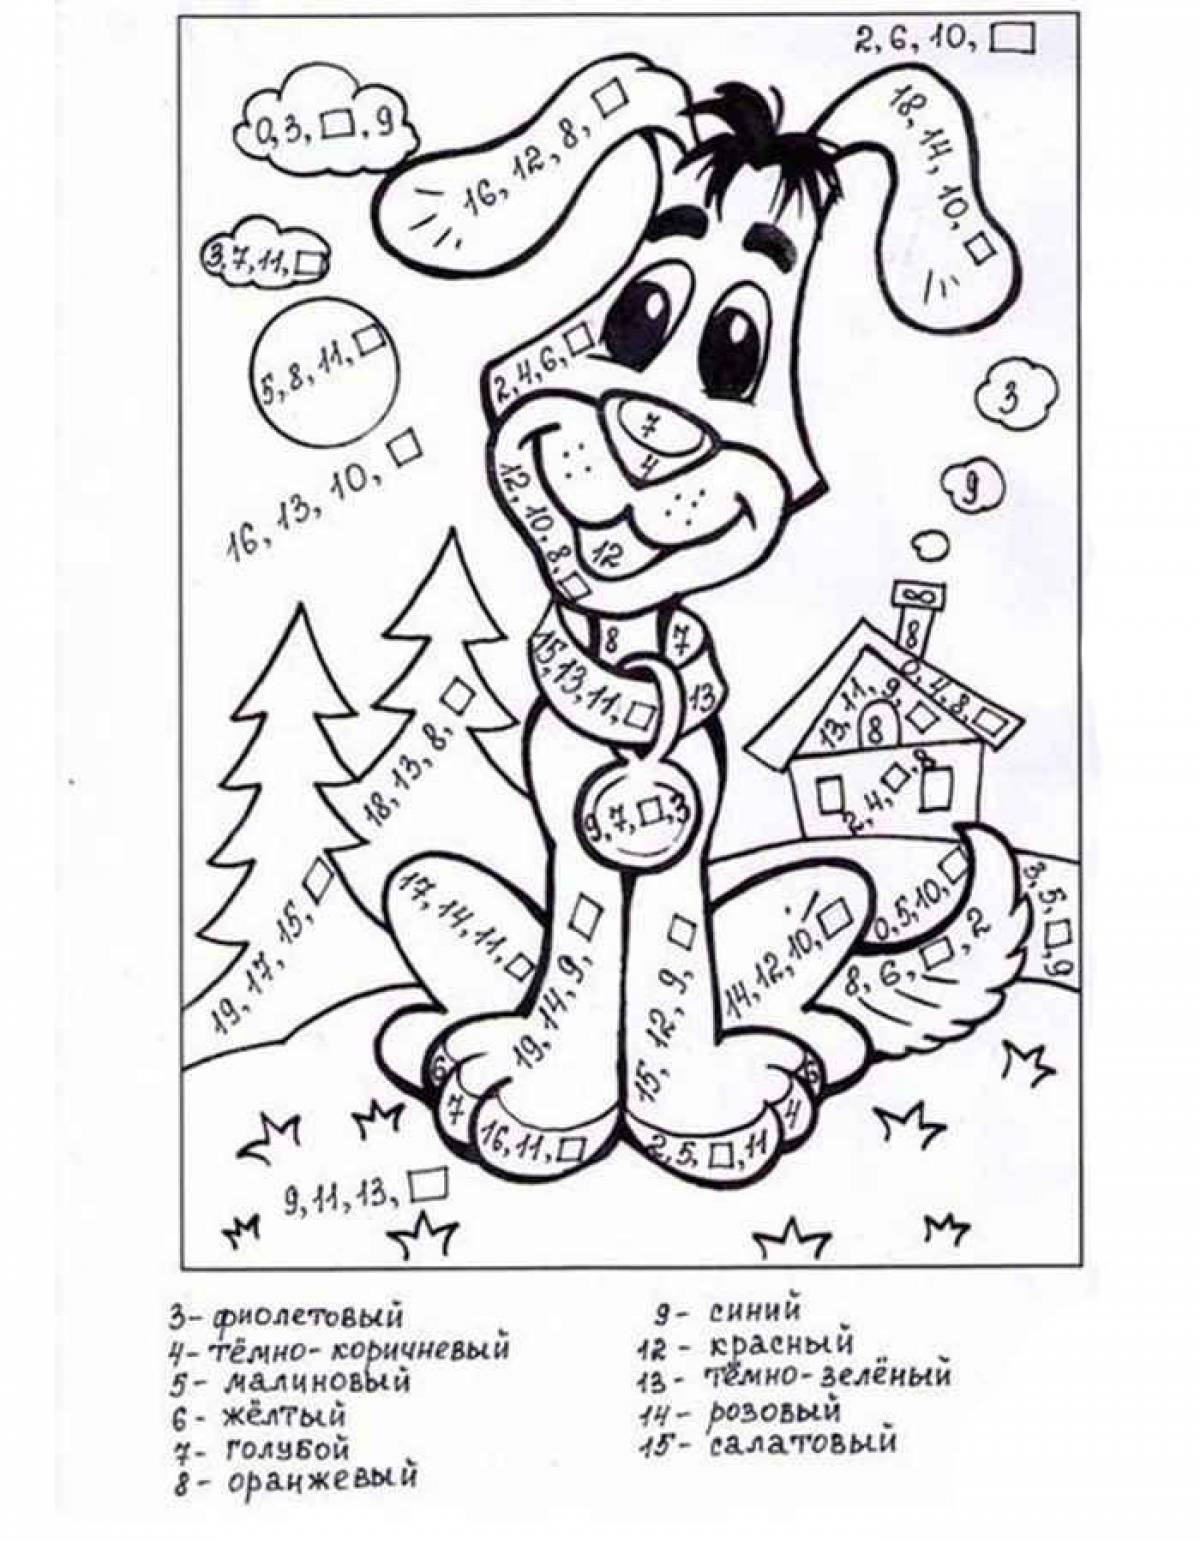 Coloring pages for 1st grade with dog examples